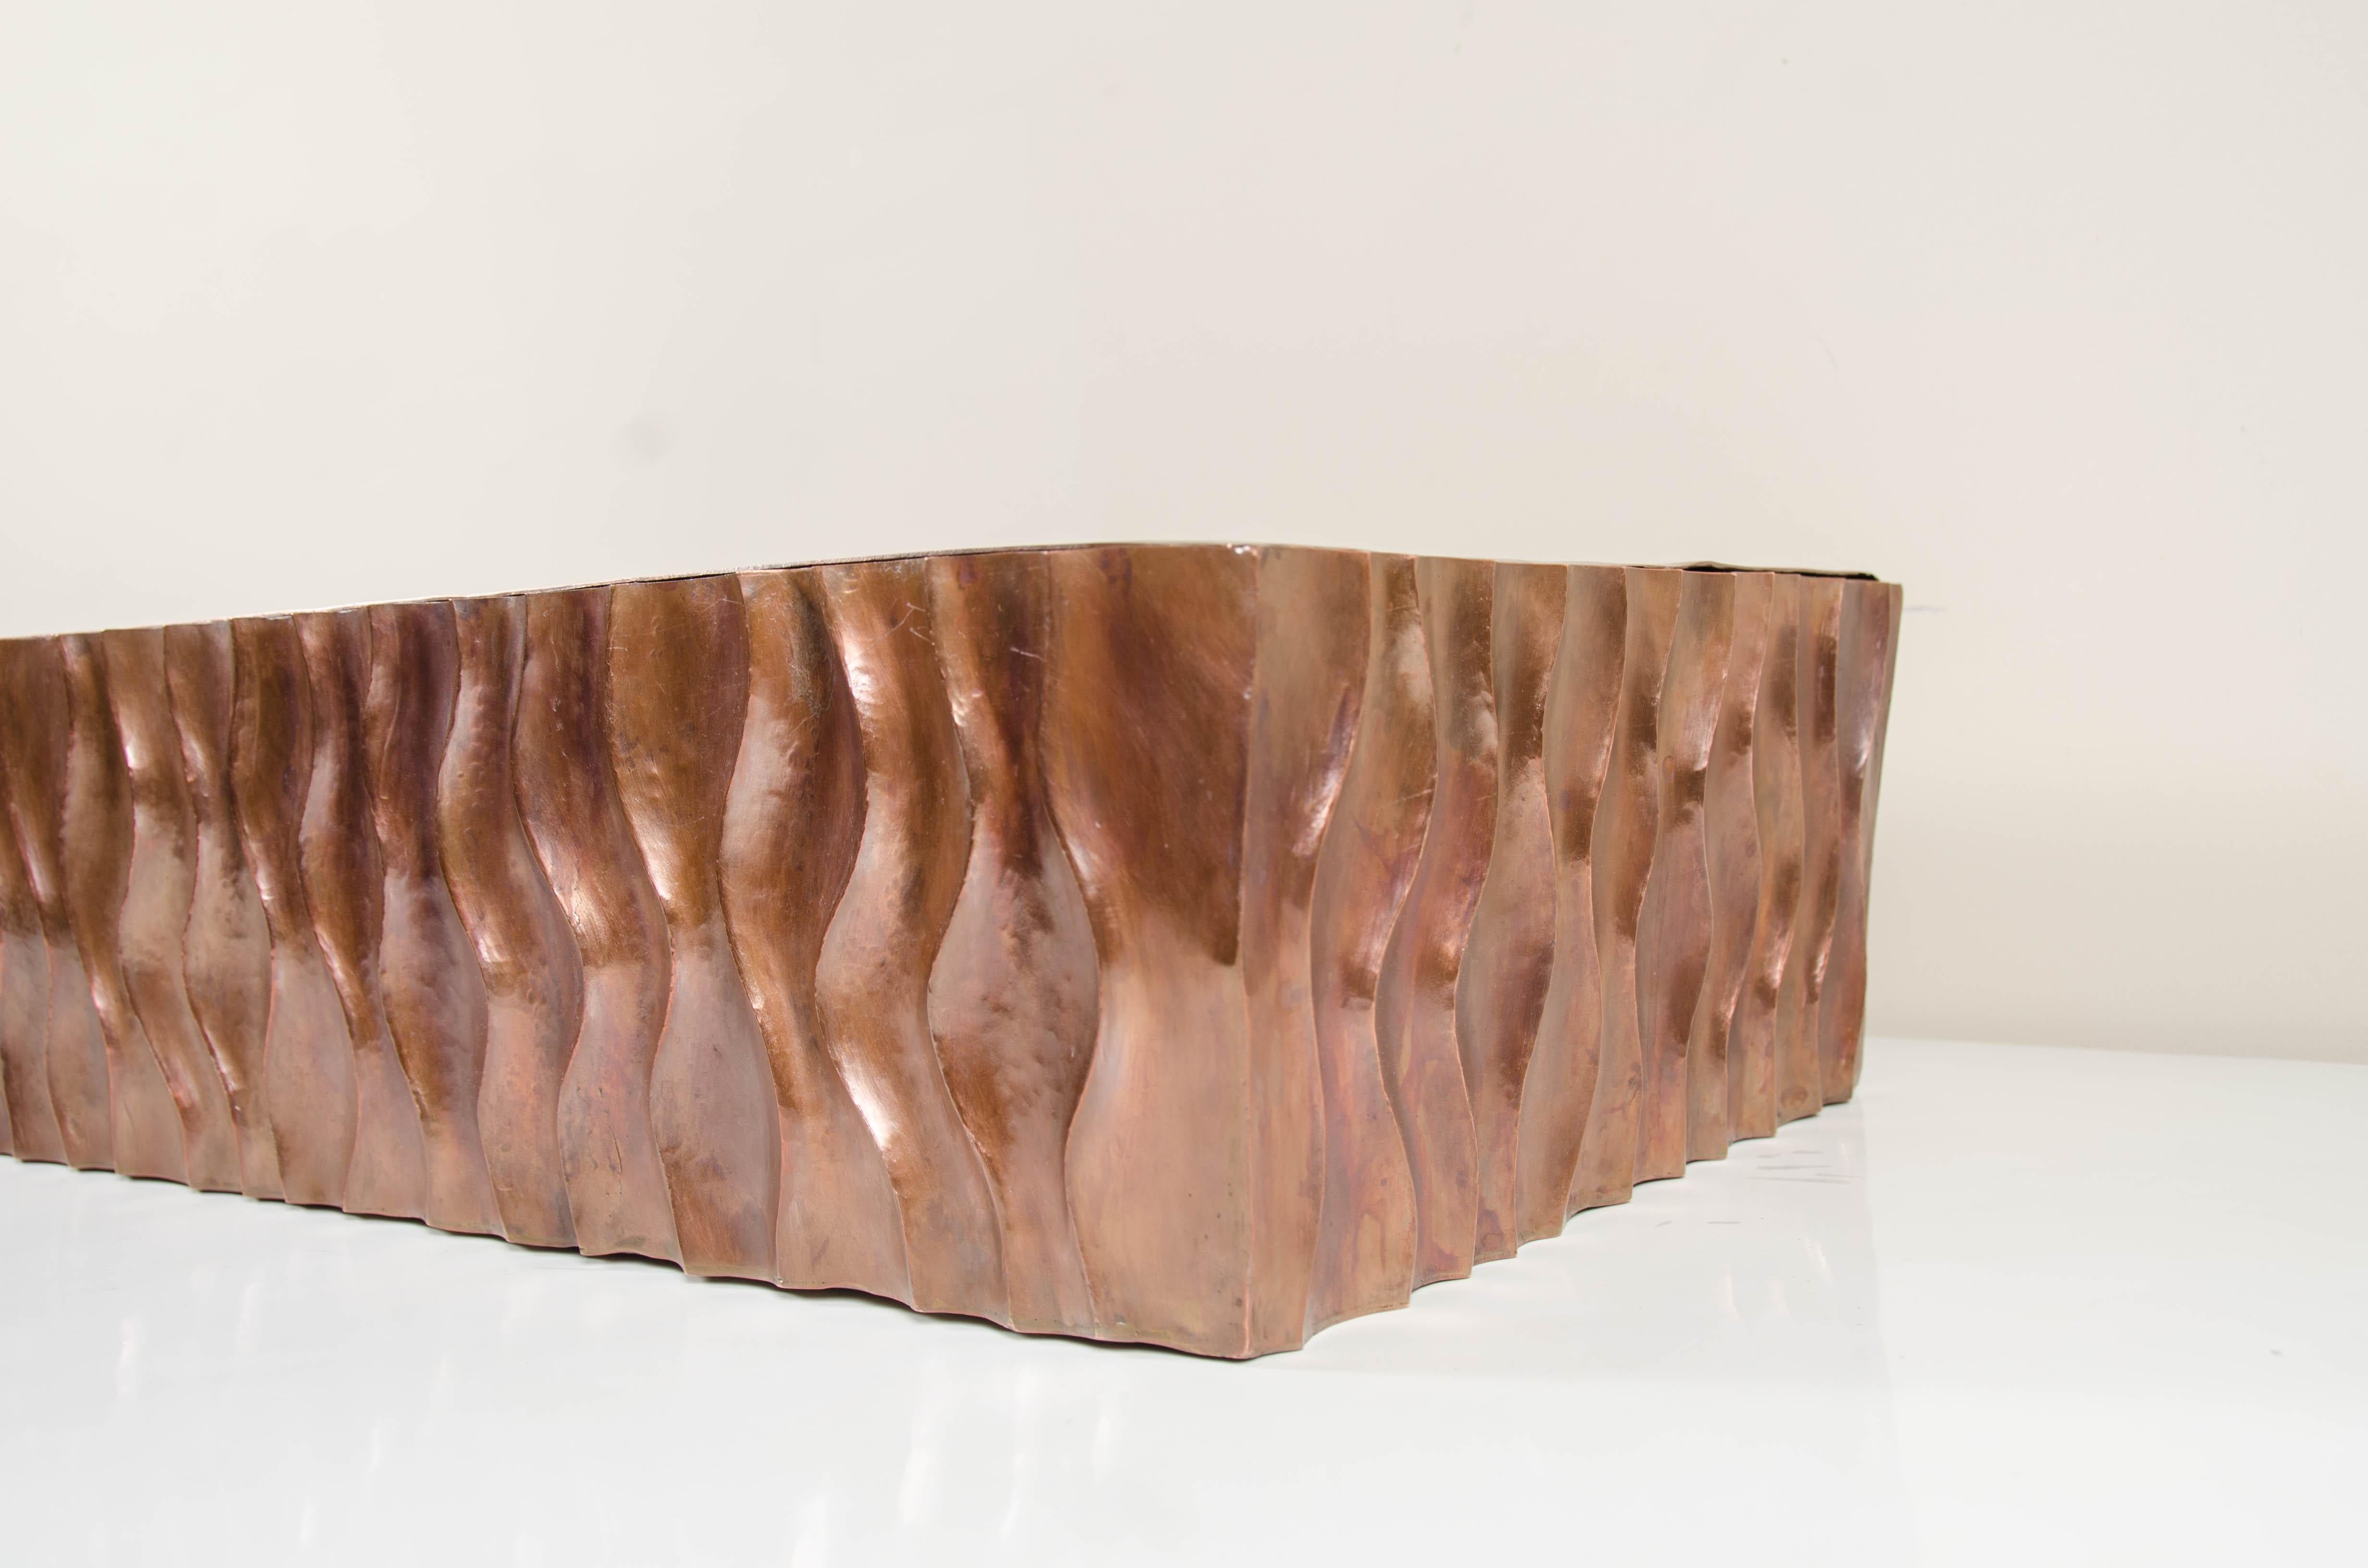 Repoussé Ola Design Planter with Liner, Antique Copper by Robert Kuo, Limited Edition For Sale